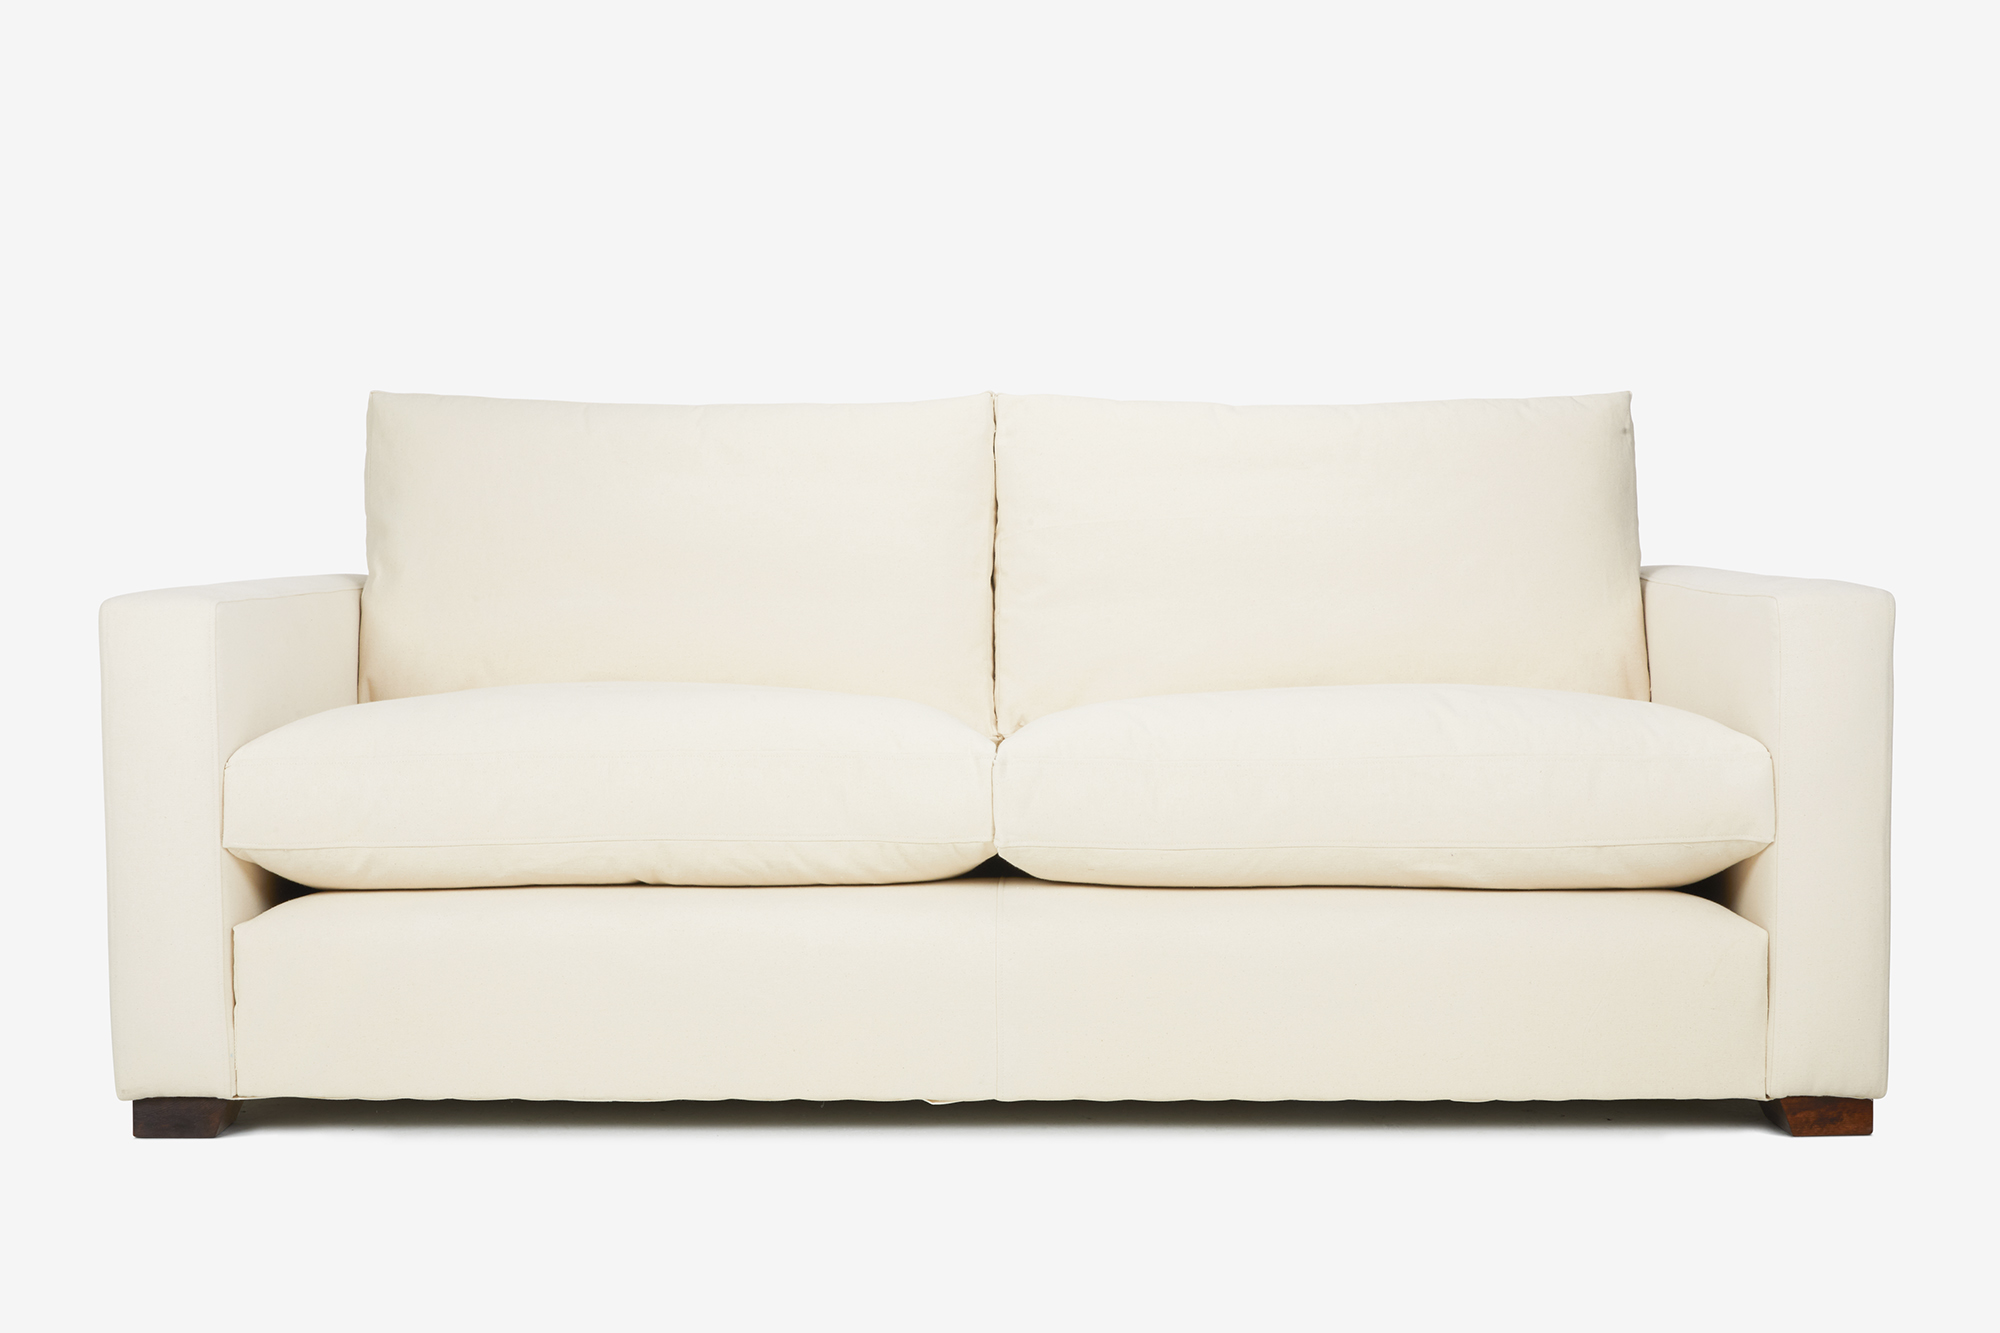 100% recycled, recyclable or biodegradable sofa.